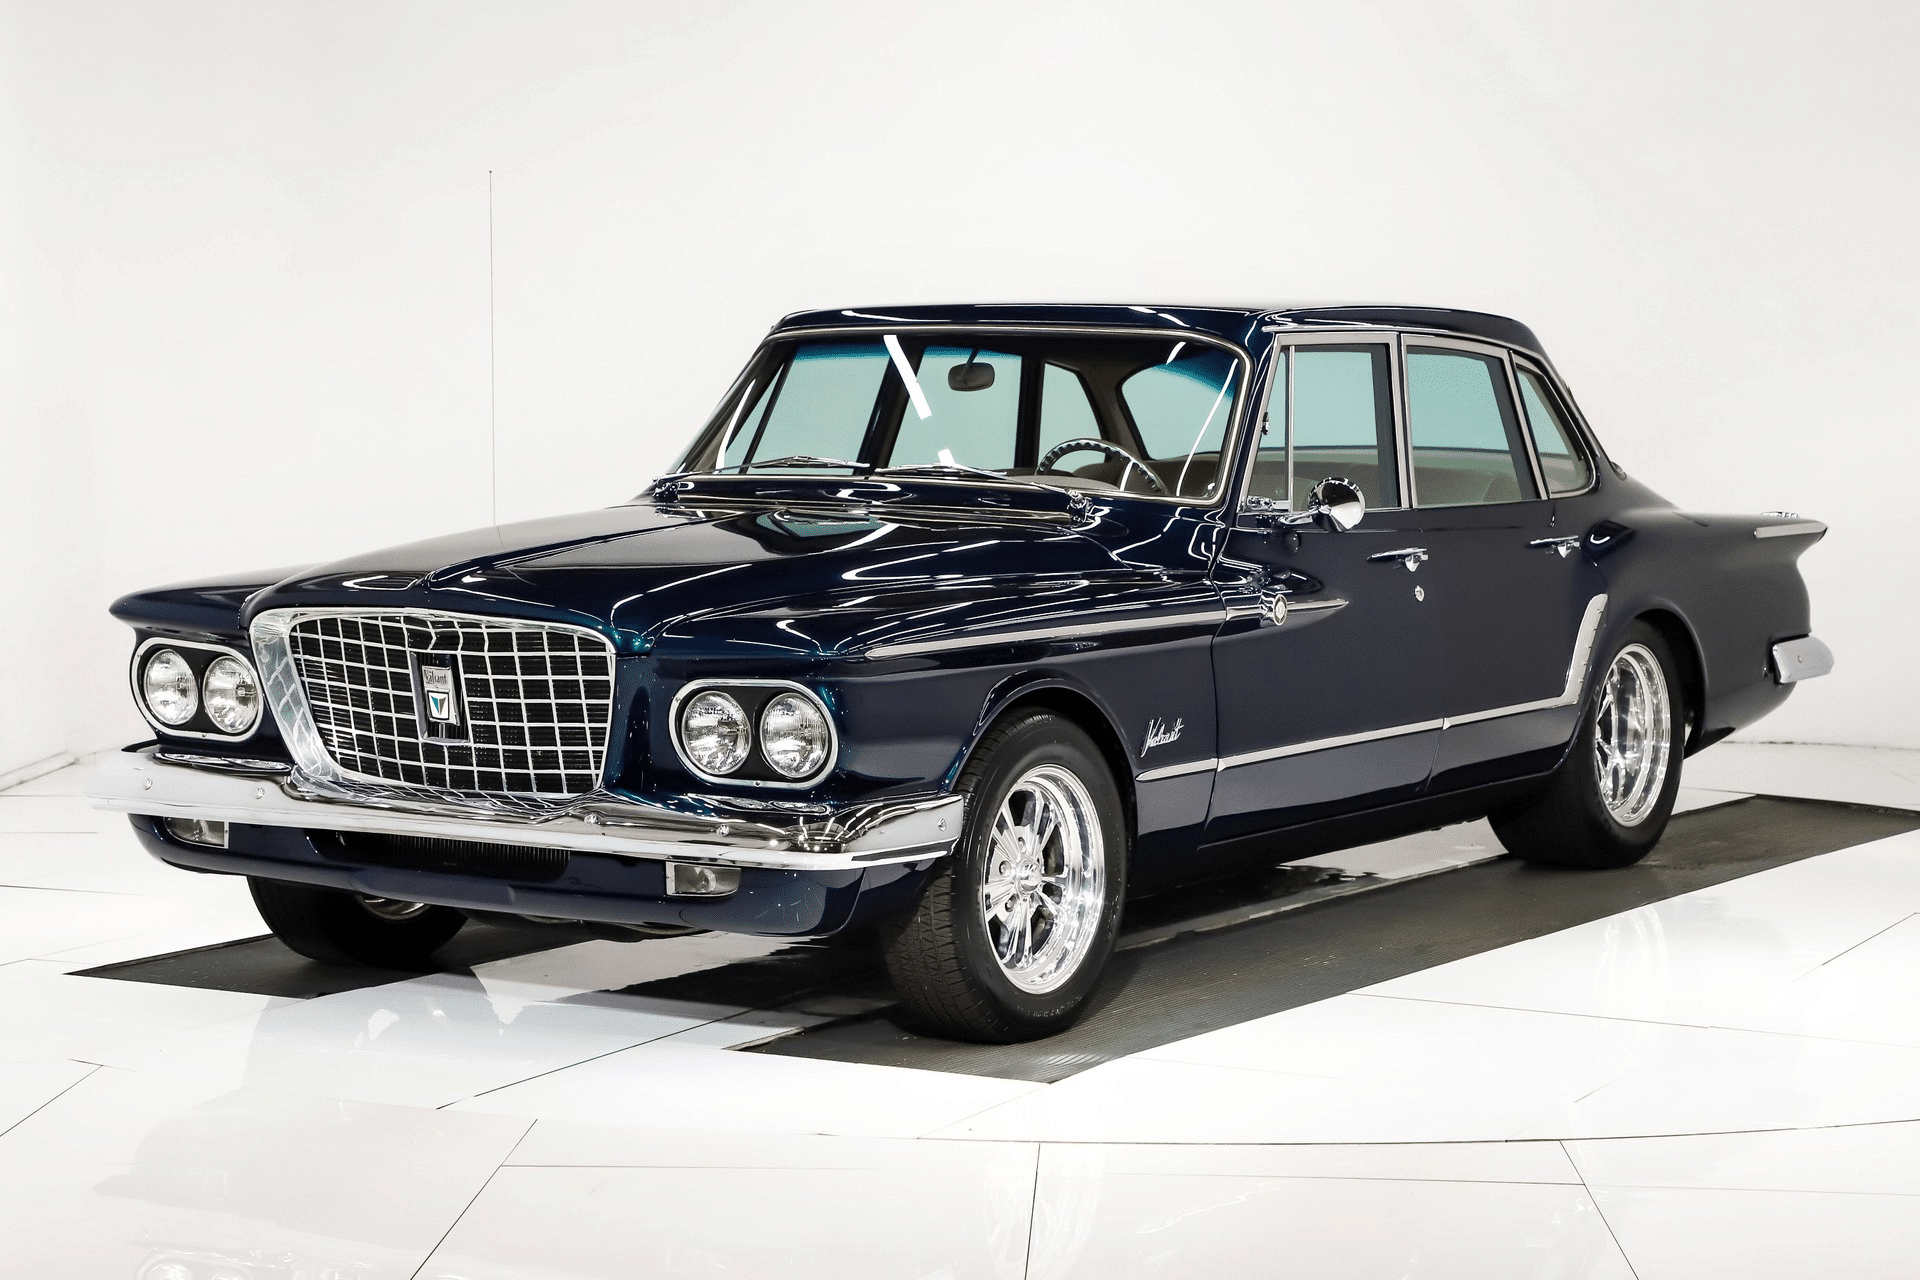 Unique Classic Muscle Car: The 1961 Plymouth Valiant